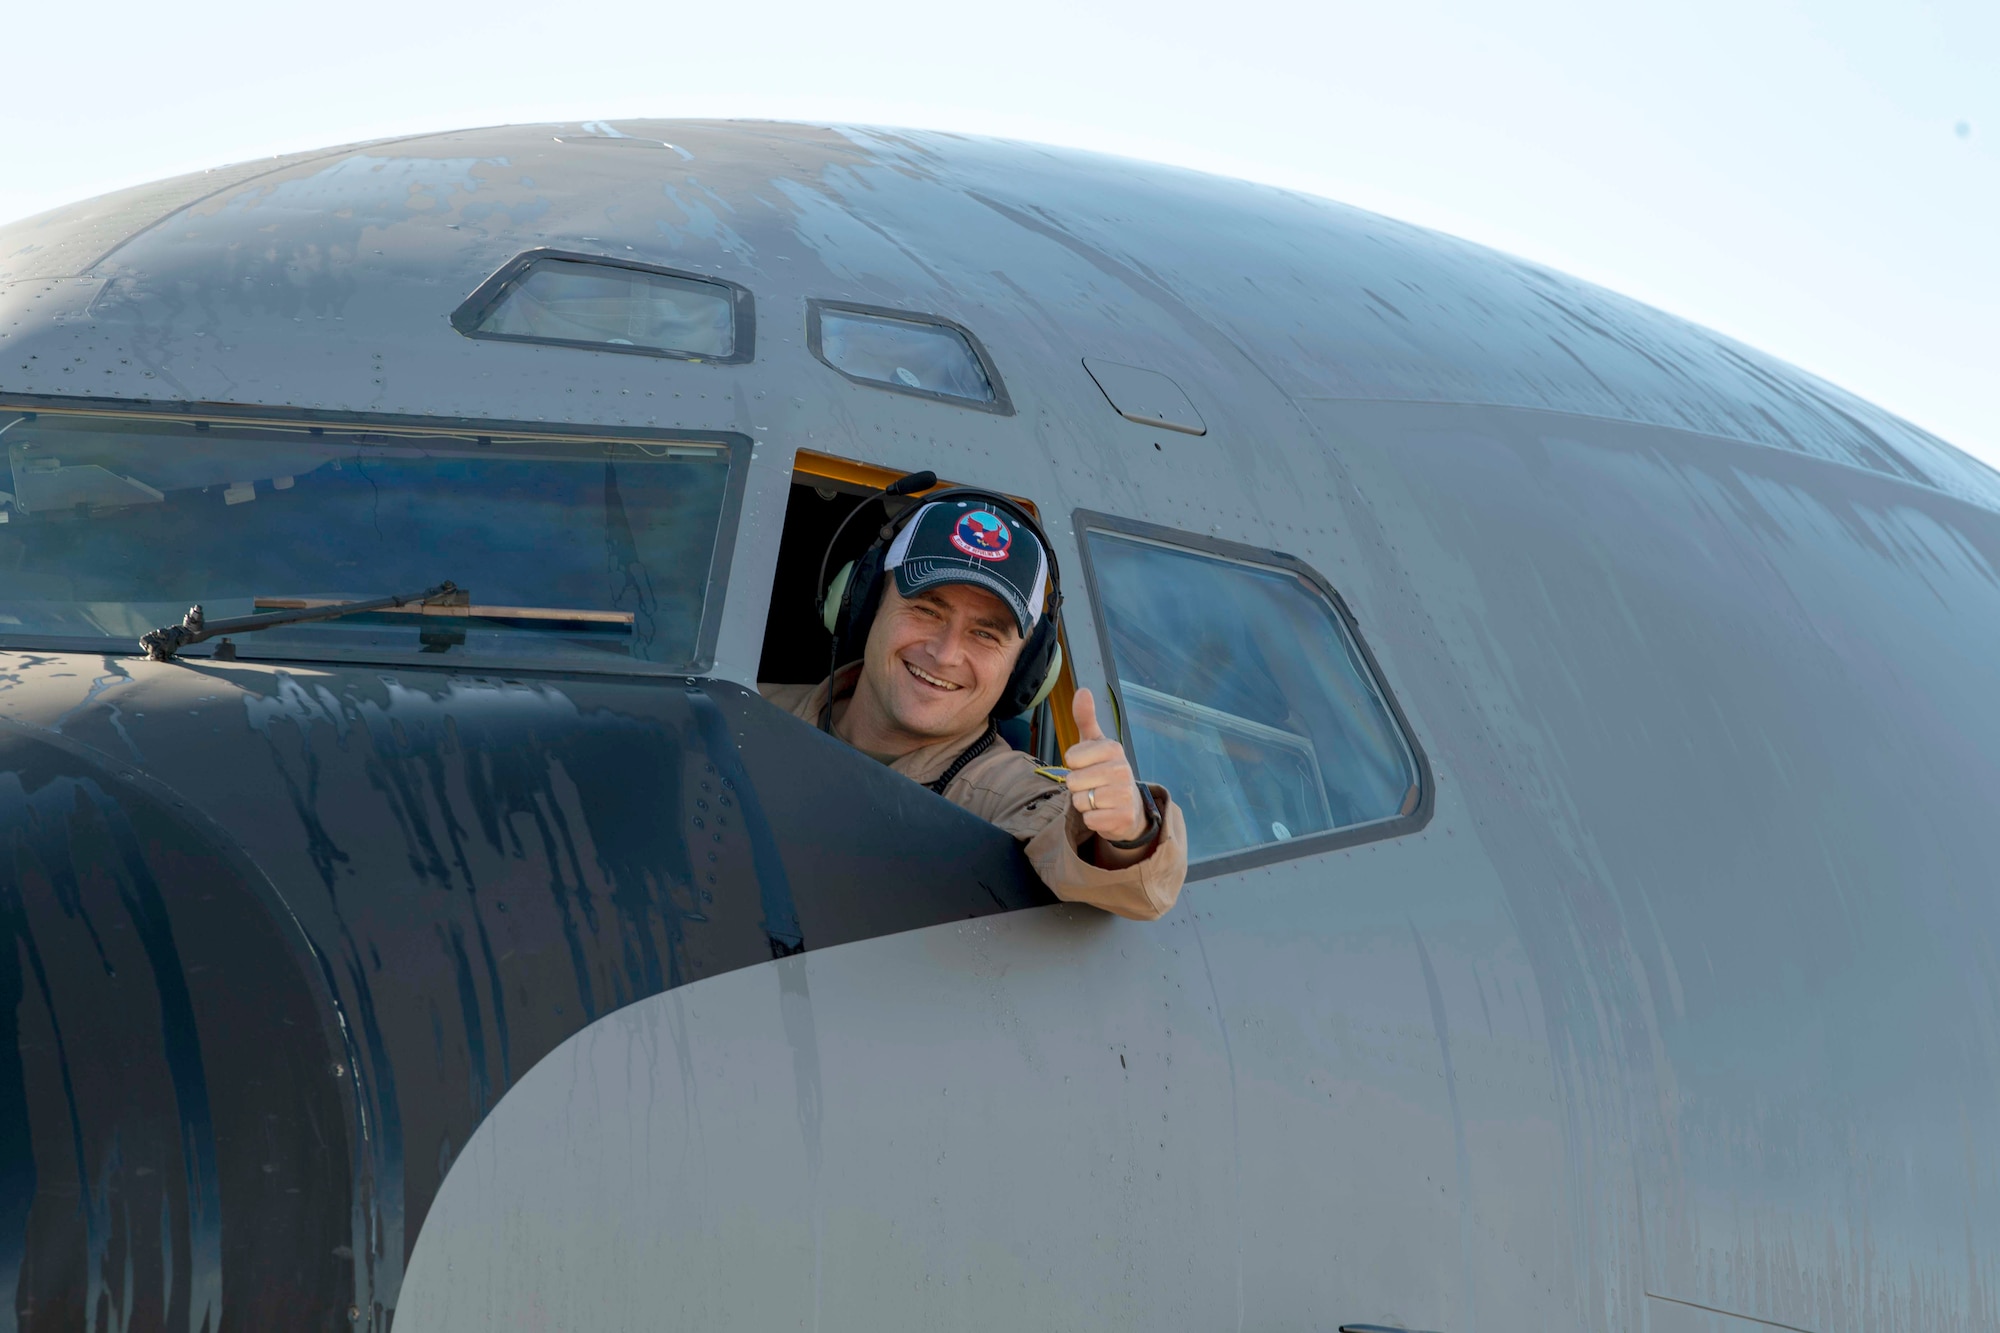 U.S. Air Force Lt. Col. Adam C. Dalson, the 911th Air Refueling Squadron (ARS) commander, gives a thumbs up after parking a KC-135 Stratotanker on the flightline on Seymour Johnson Air Force Base, North Carolina, Dec. 16, 2019. The 911 ARS completed their final mission on a KC-135. (U.S. Air Force photo by Staff Sgt. Mary McKnight)